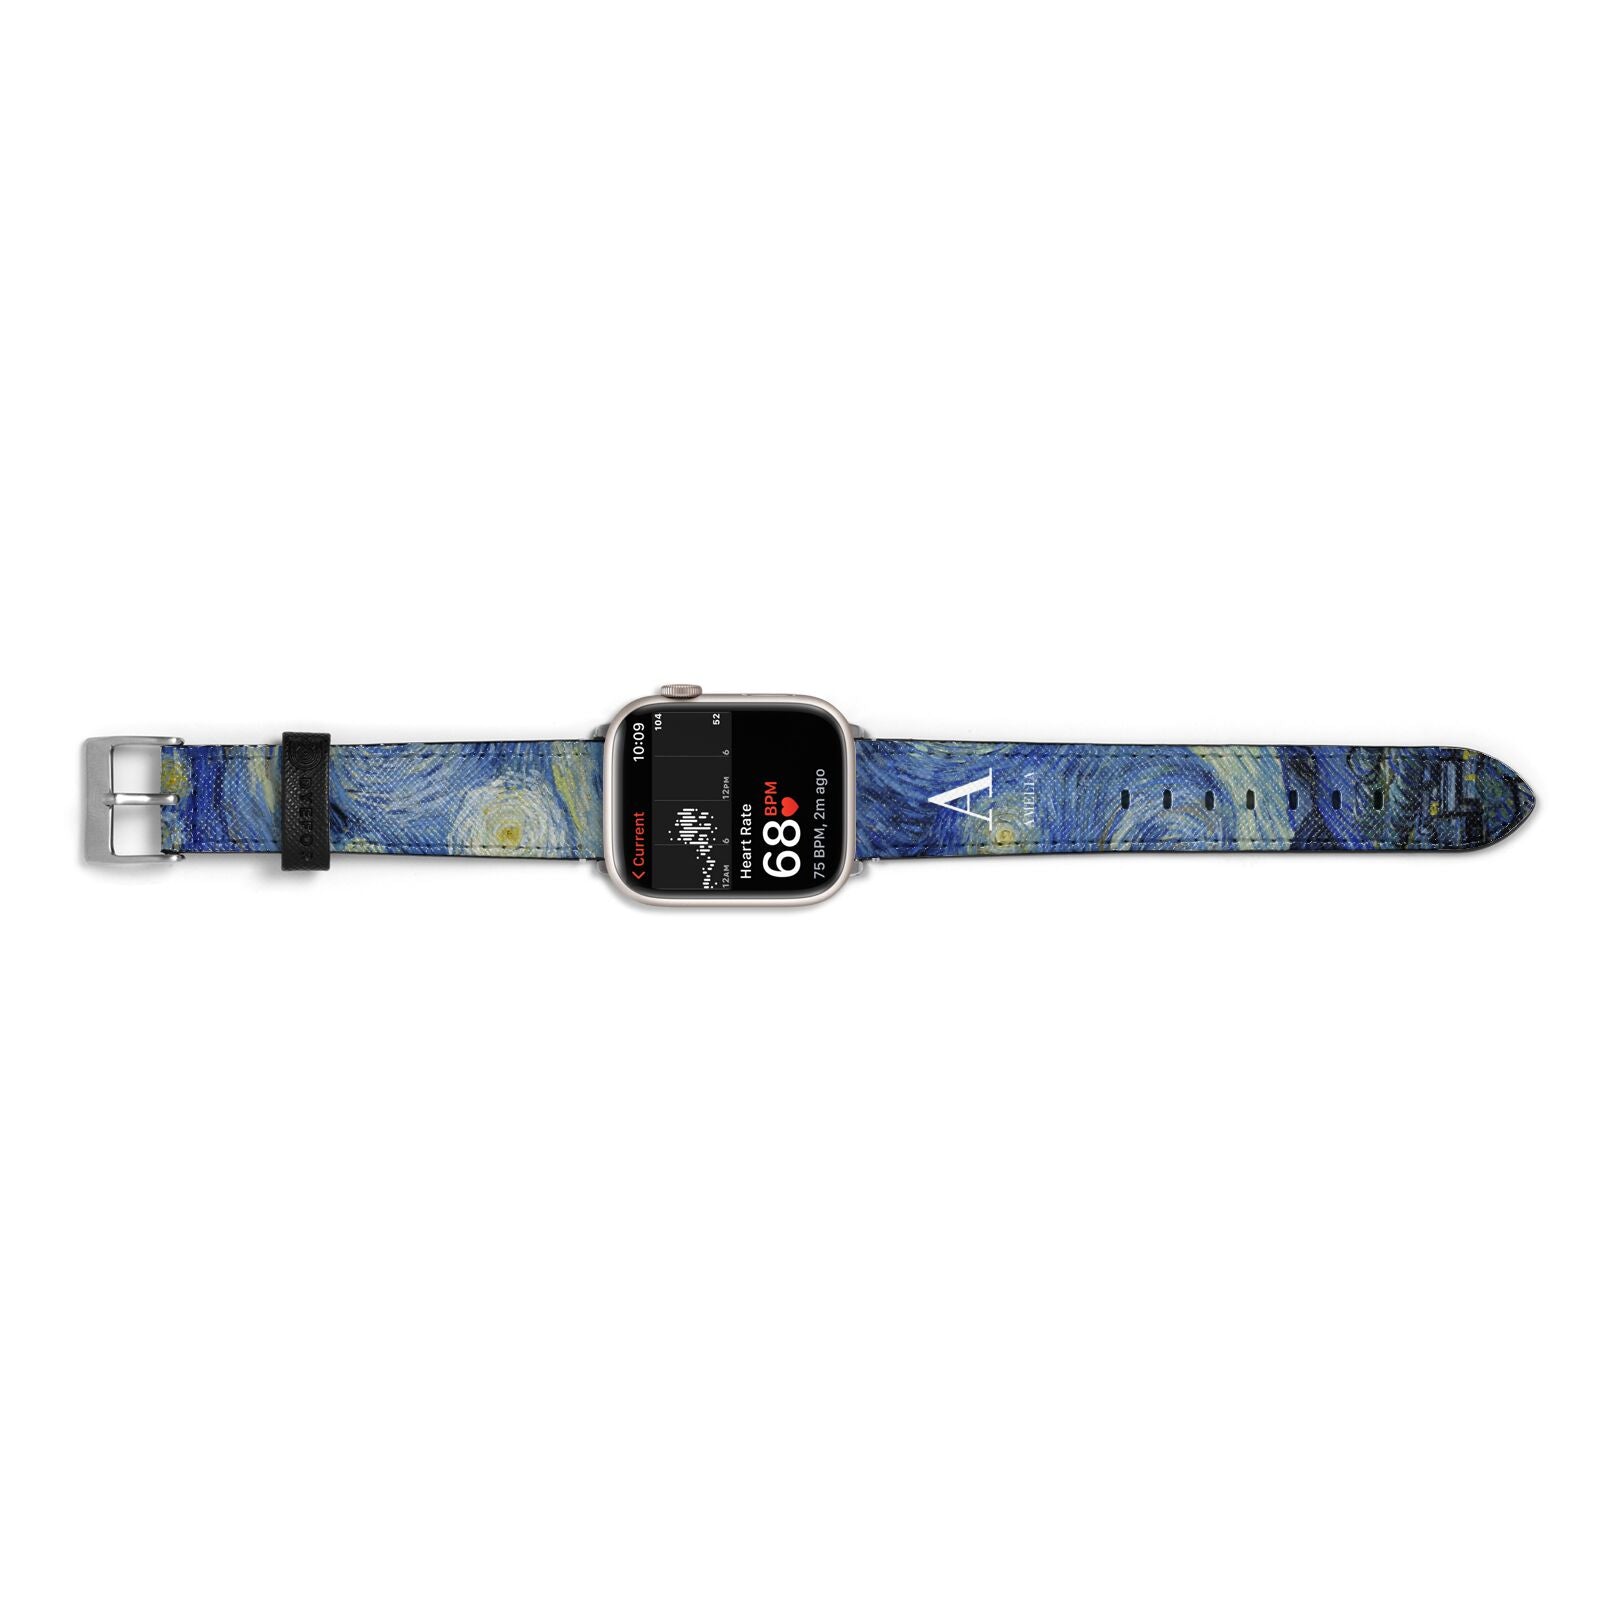 Personalised Van Gogh Starry Night Apple Watch Strap Size 38mm Landscape Image Silver Hardware